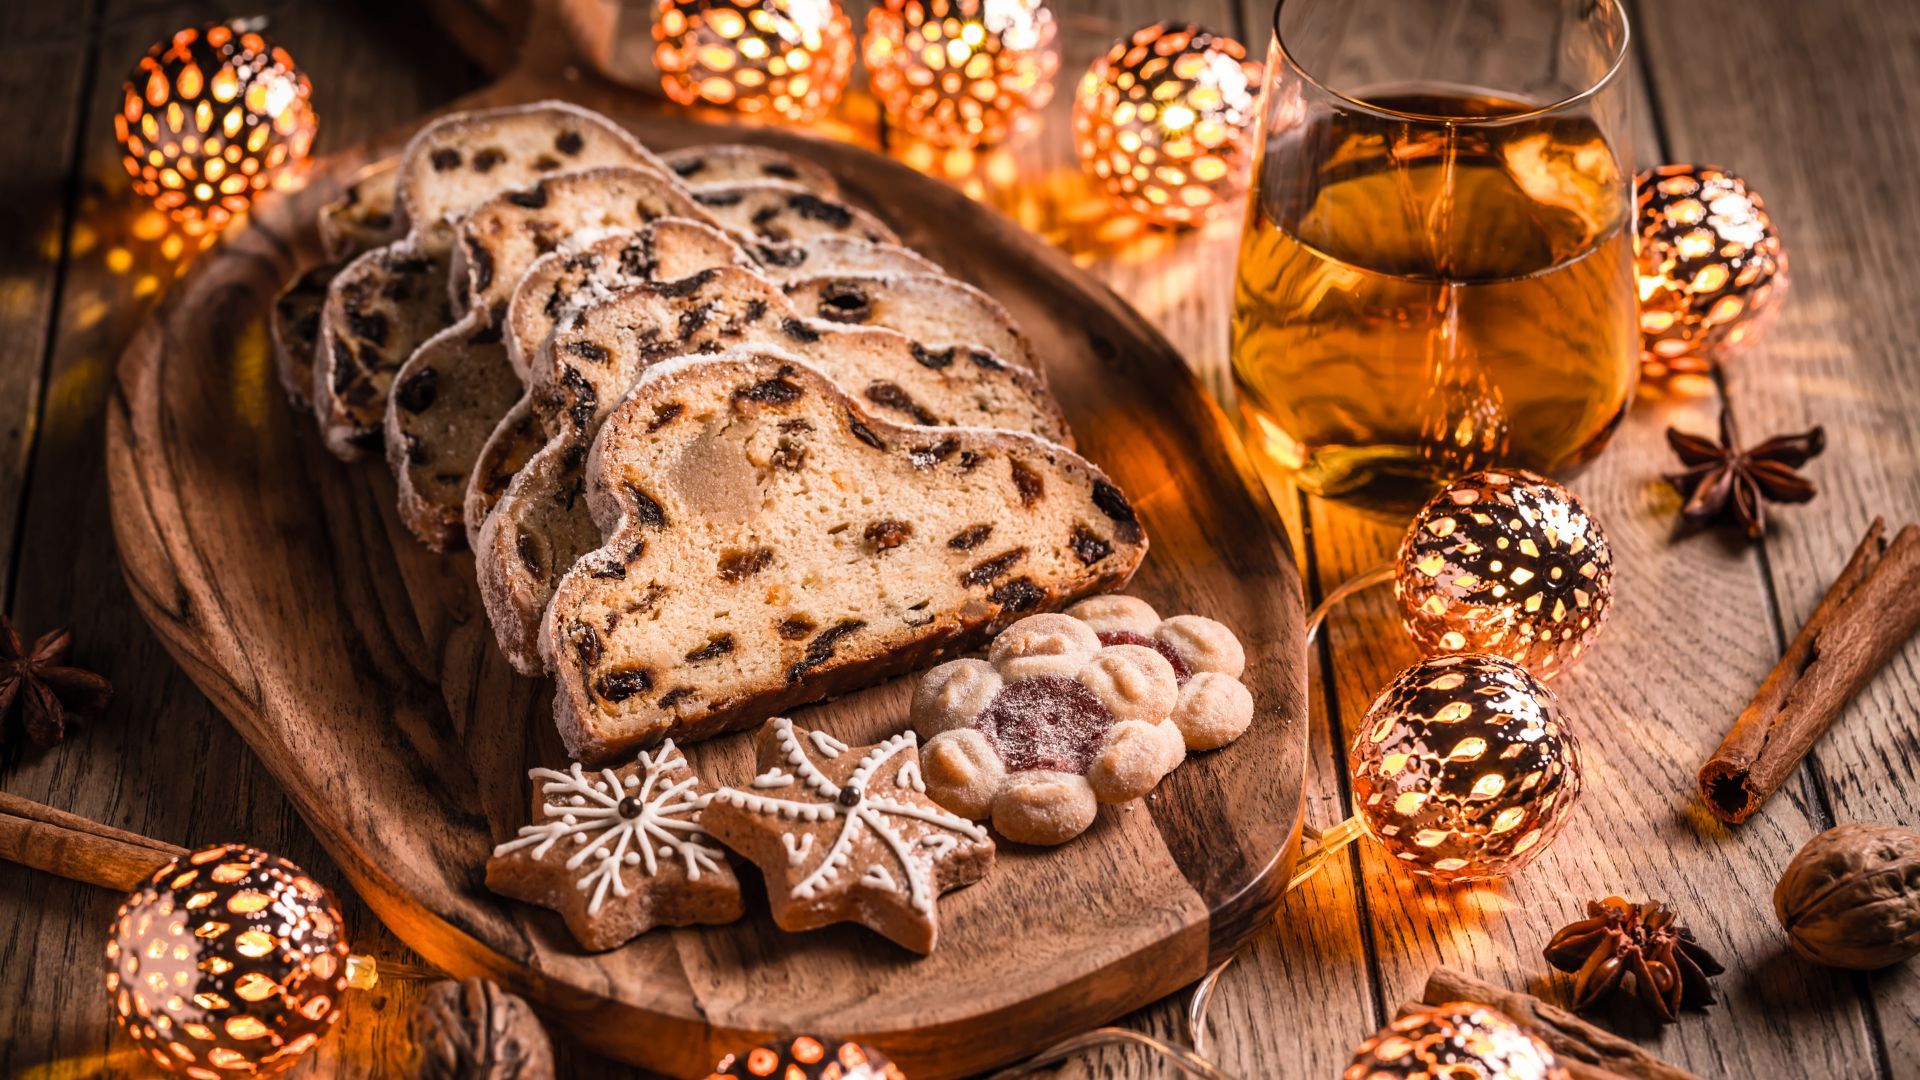 Classic Christmas Stollen! | Peek inside our Christmas workshop! 👀 The  elves at our patisserie make Germany's favorite winter bread, Stollen, from  scratch. Our classic stollen,... | By Theobroma Patisserie IndiaFacebook